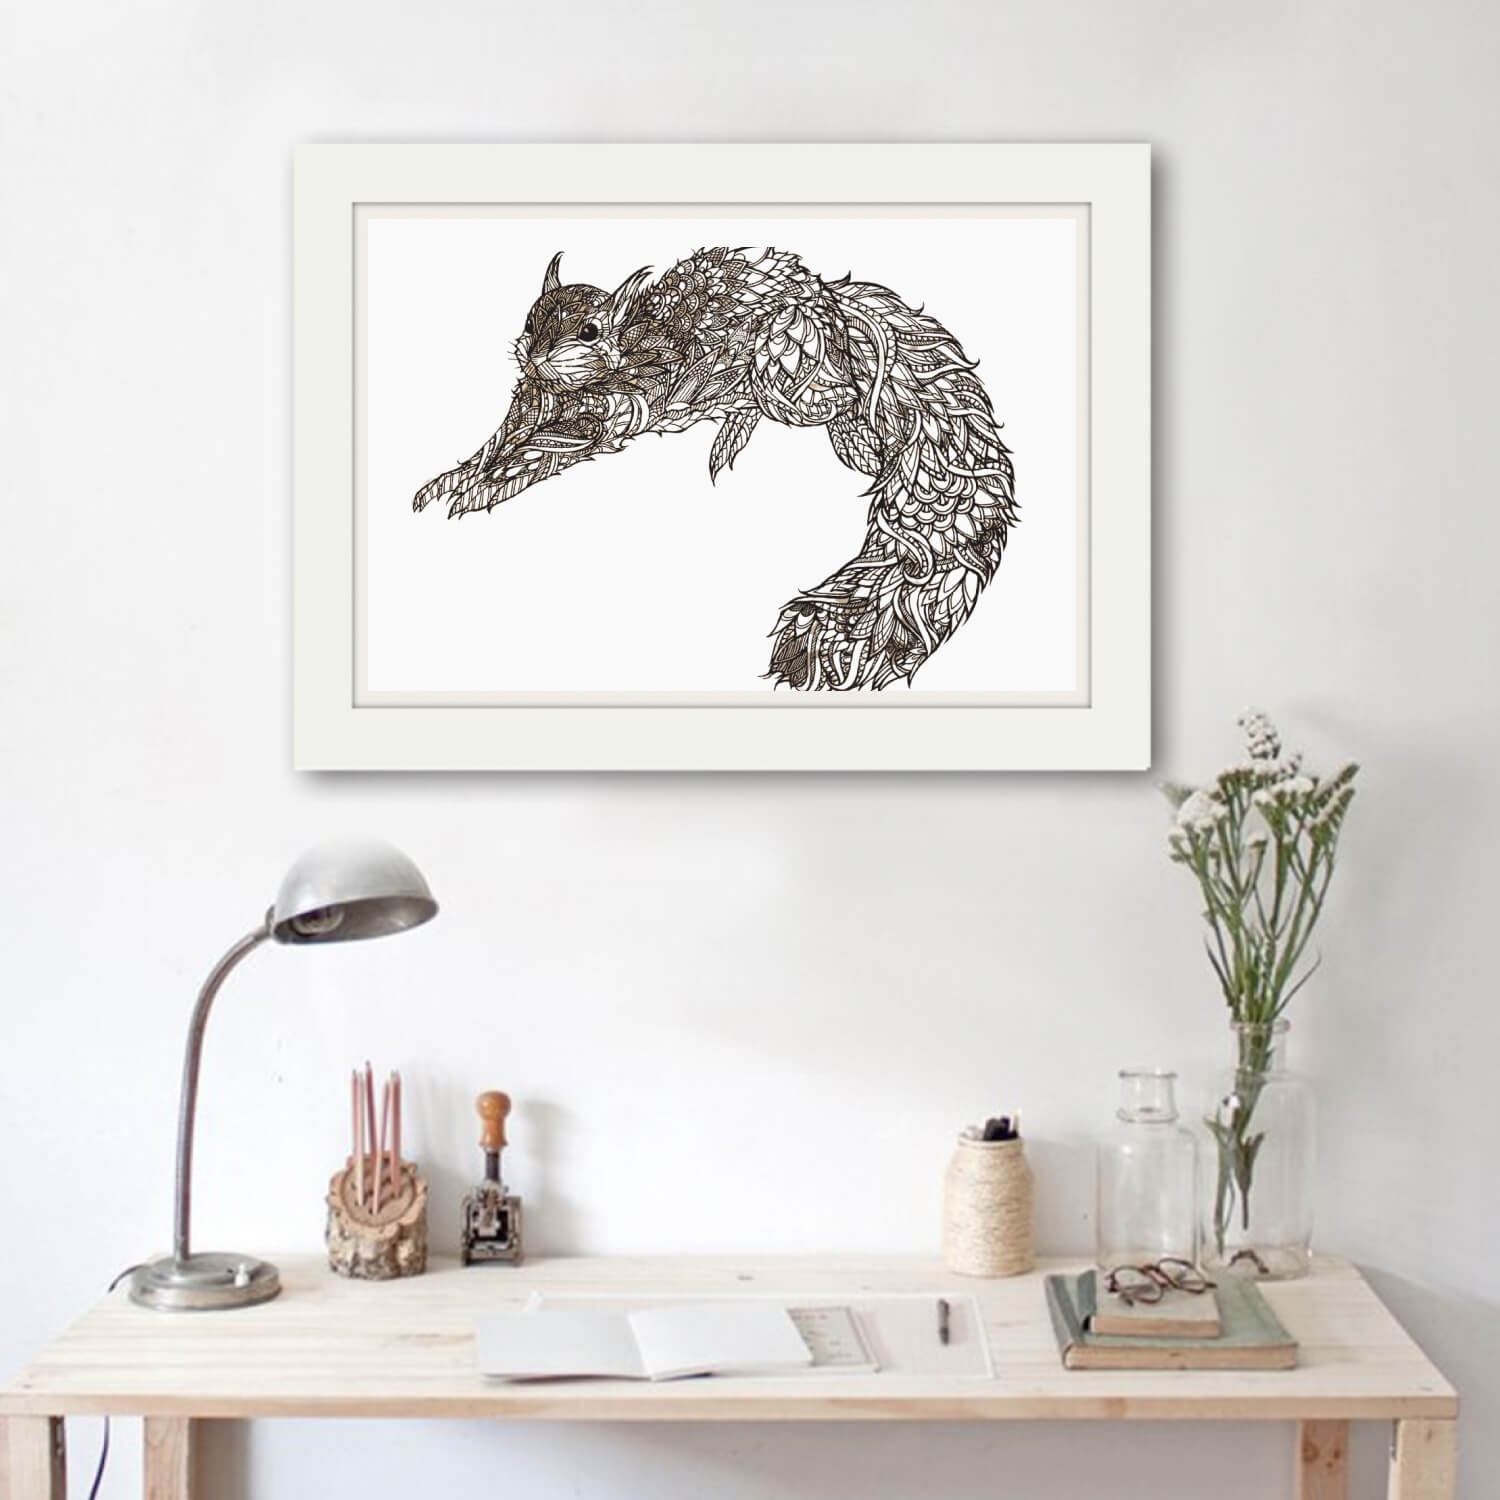 Drawn with patterns on a white picture of the incredible beauty of a squirrel.